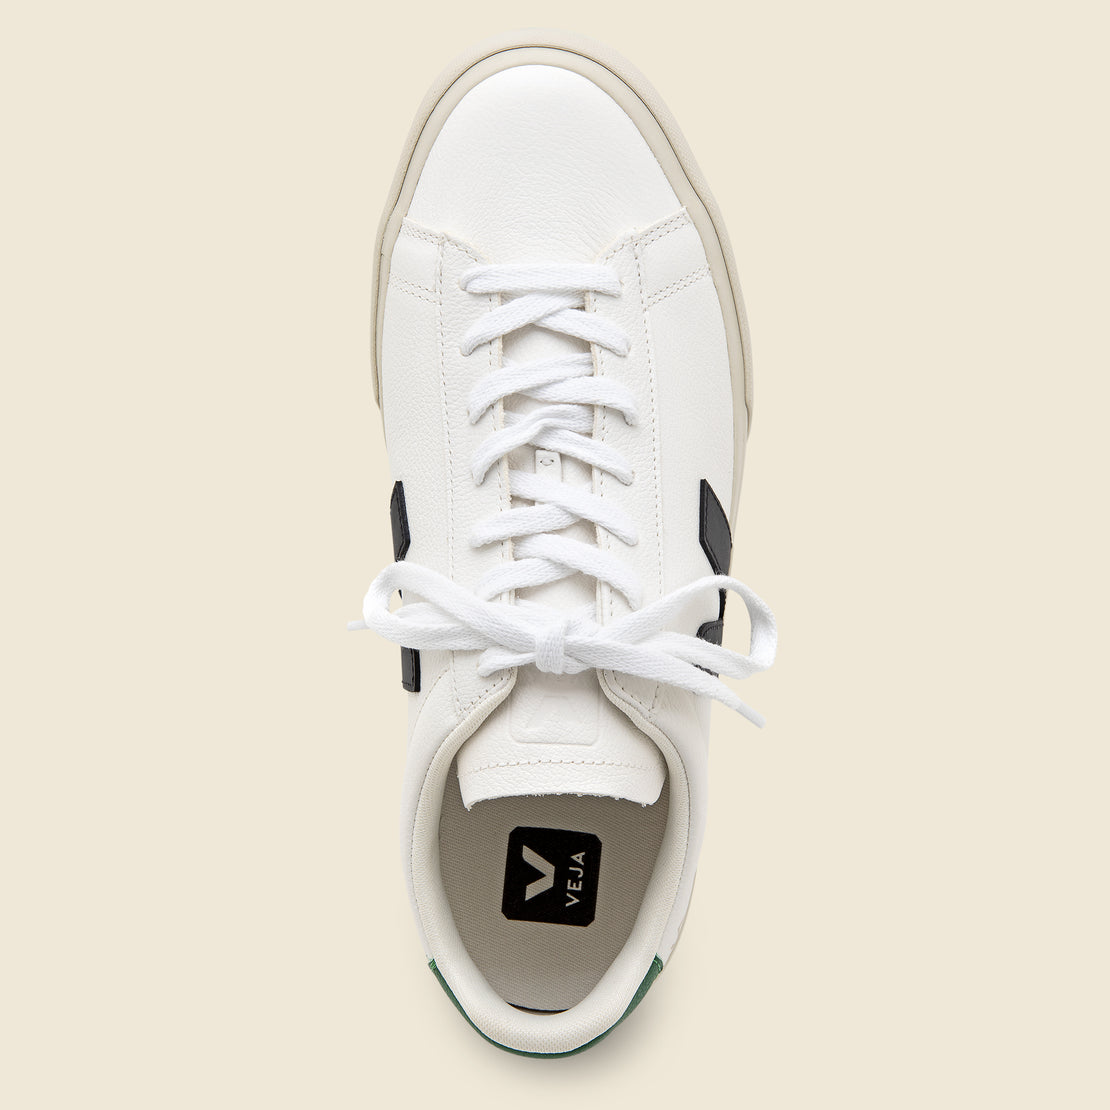 Campo Leather Sneaker - Extra White/Emaraude/Black - Veja - STAG Provisions - Shoes - Athletic